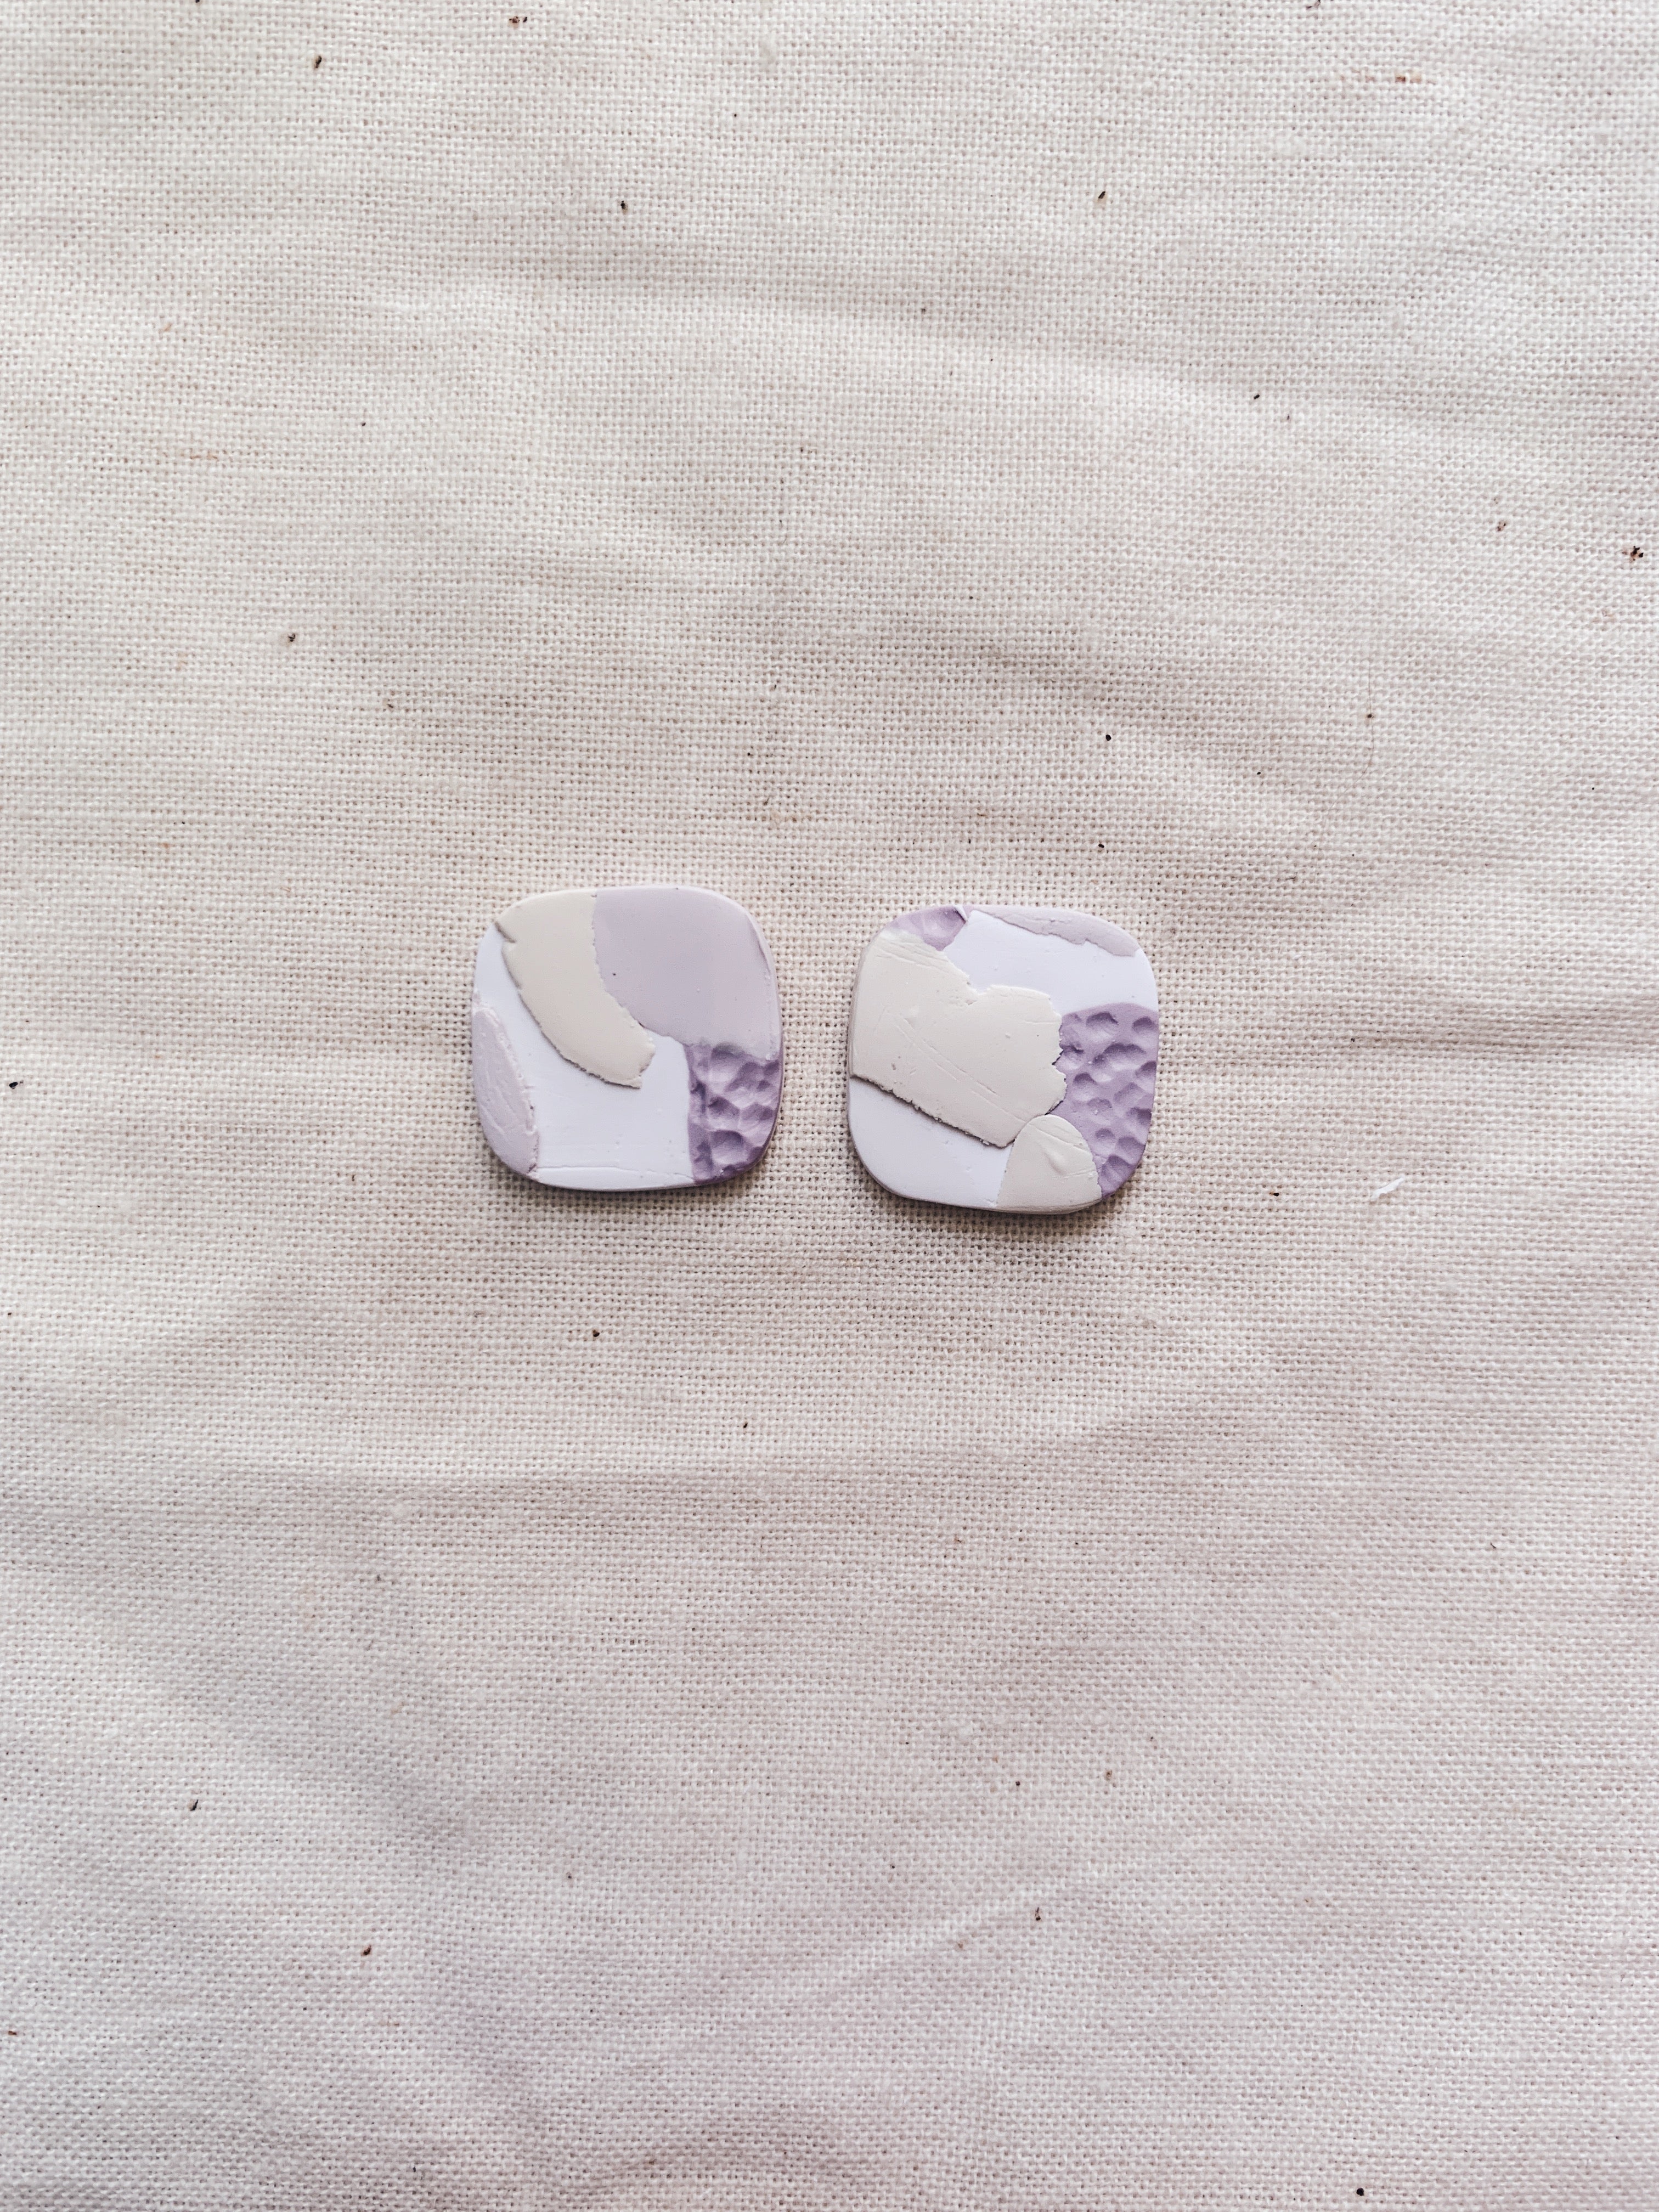 Serenity (Lavender) - Rounded Sq Studs